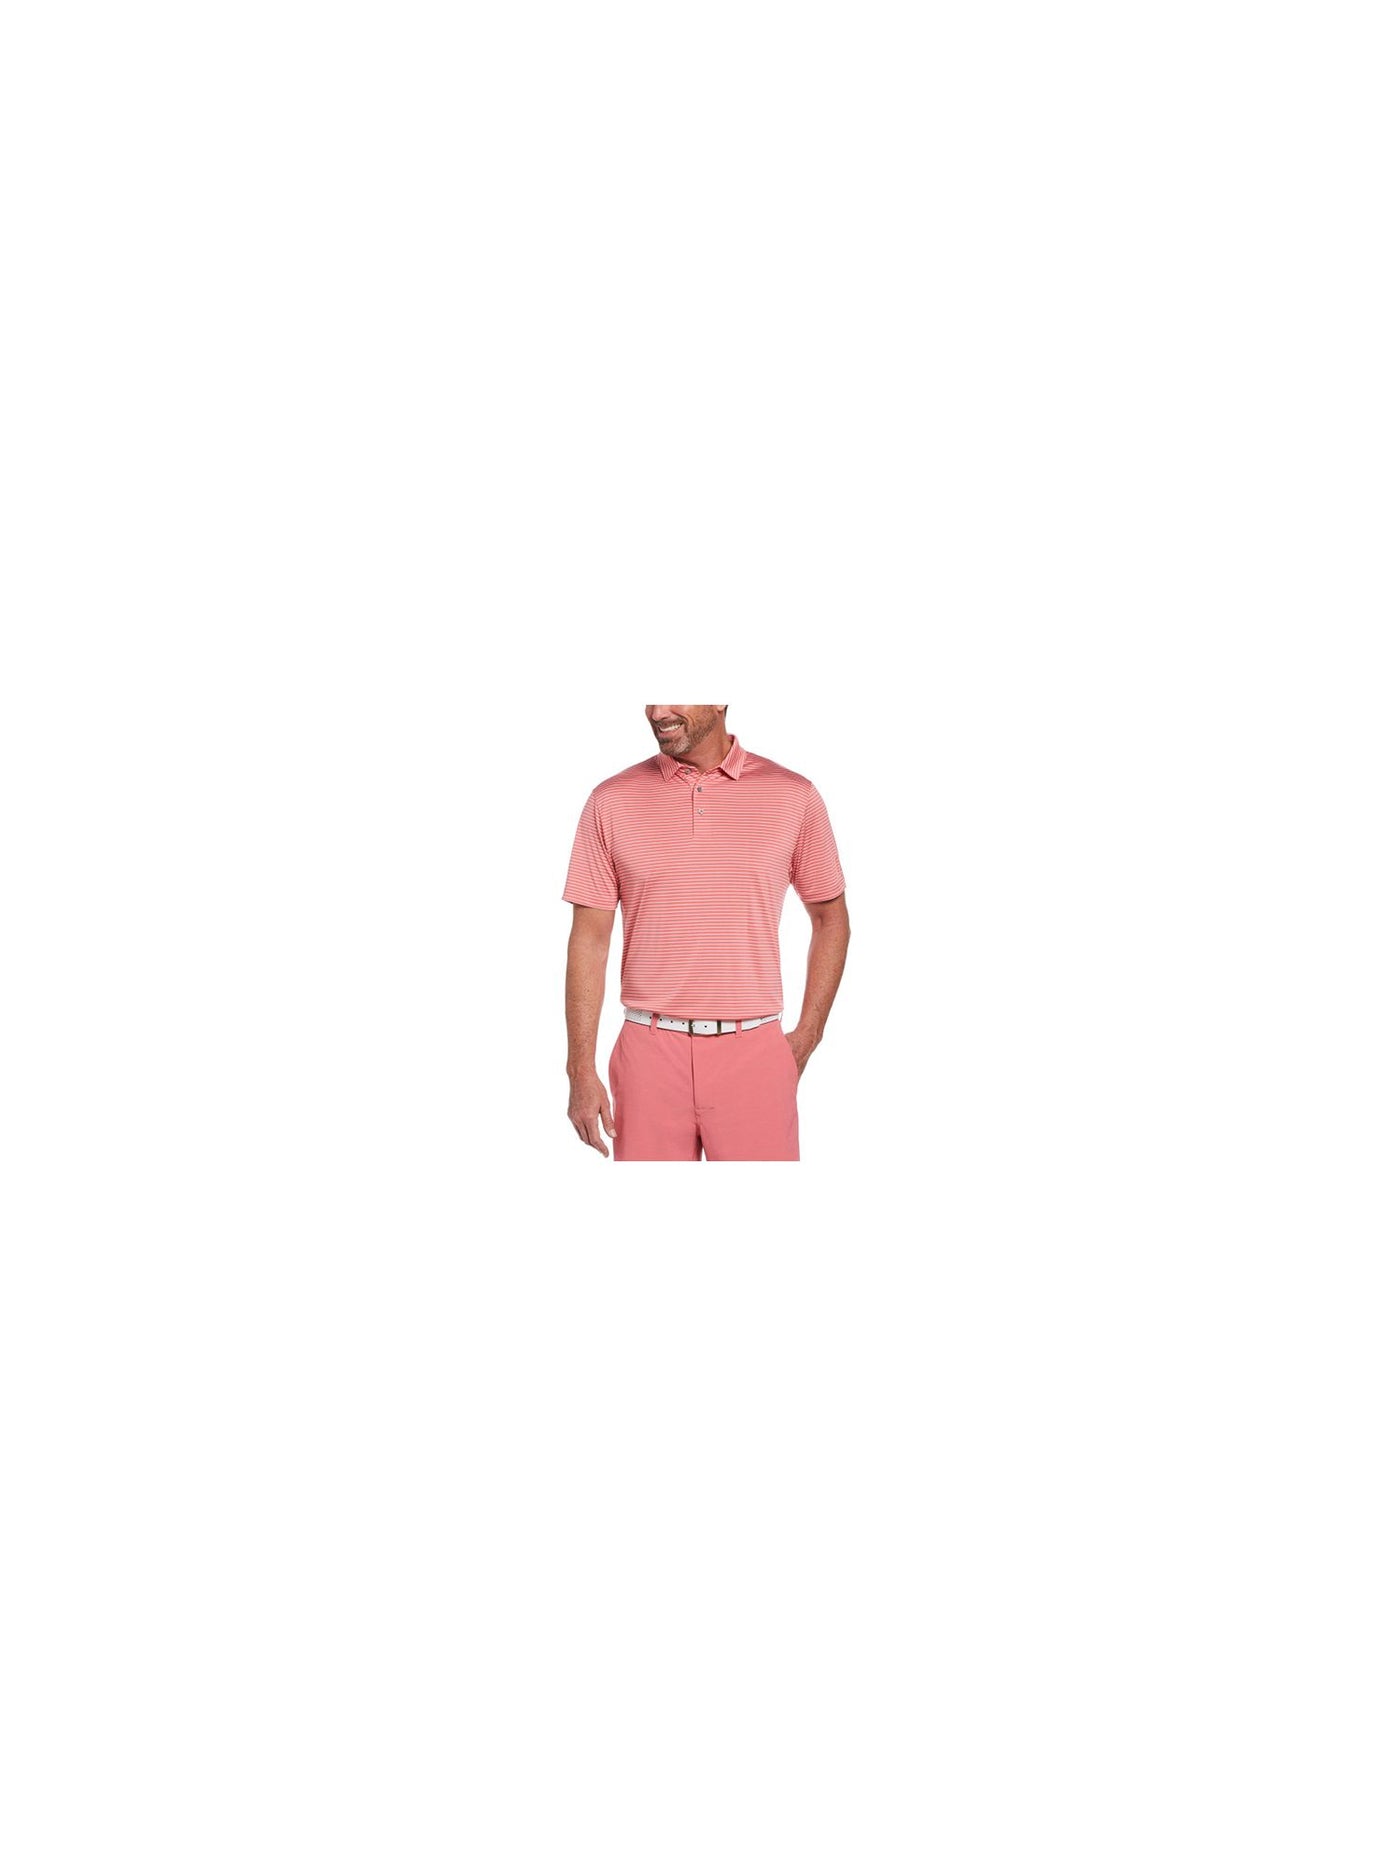 HYBRID APPAREL Mens Single Feeder Pink Striped Classic Fit Moisture Wicking Polo L